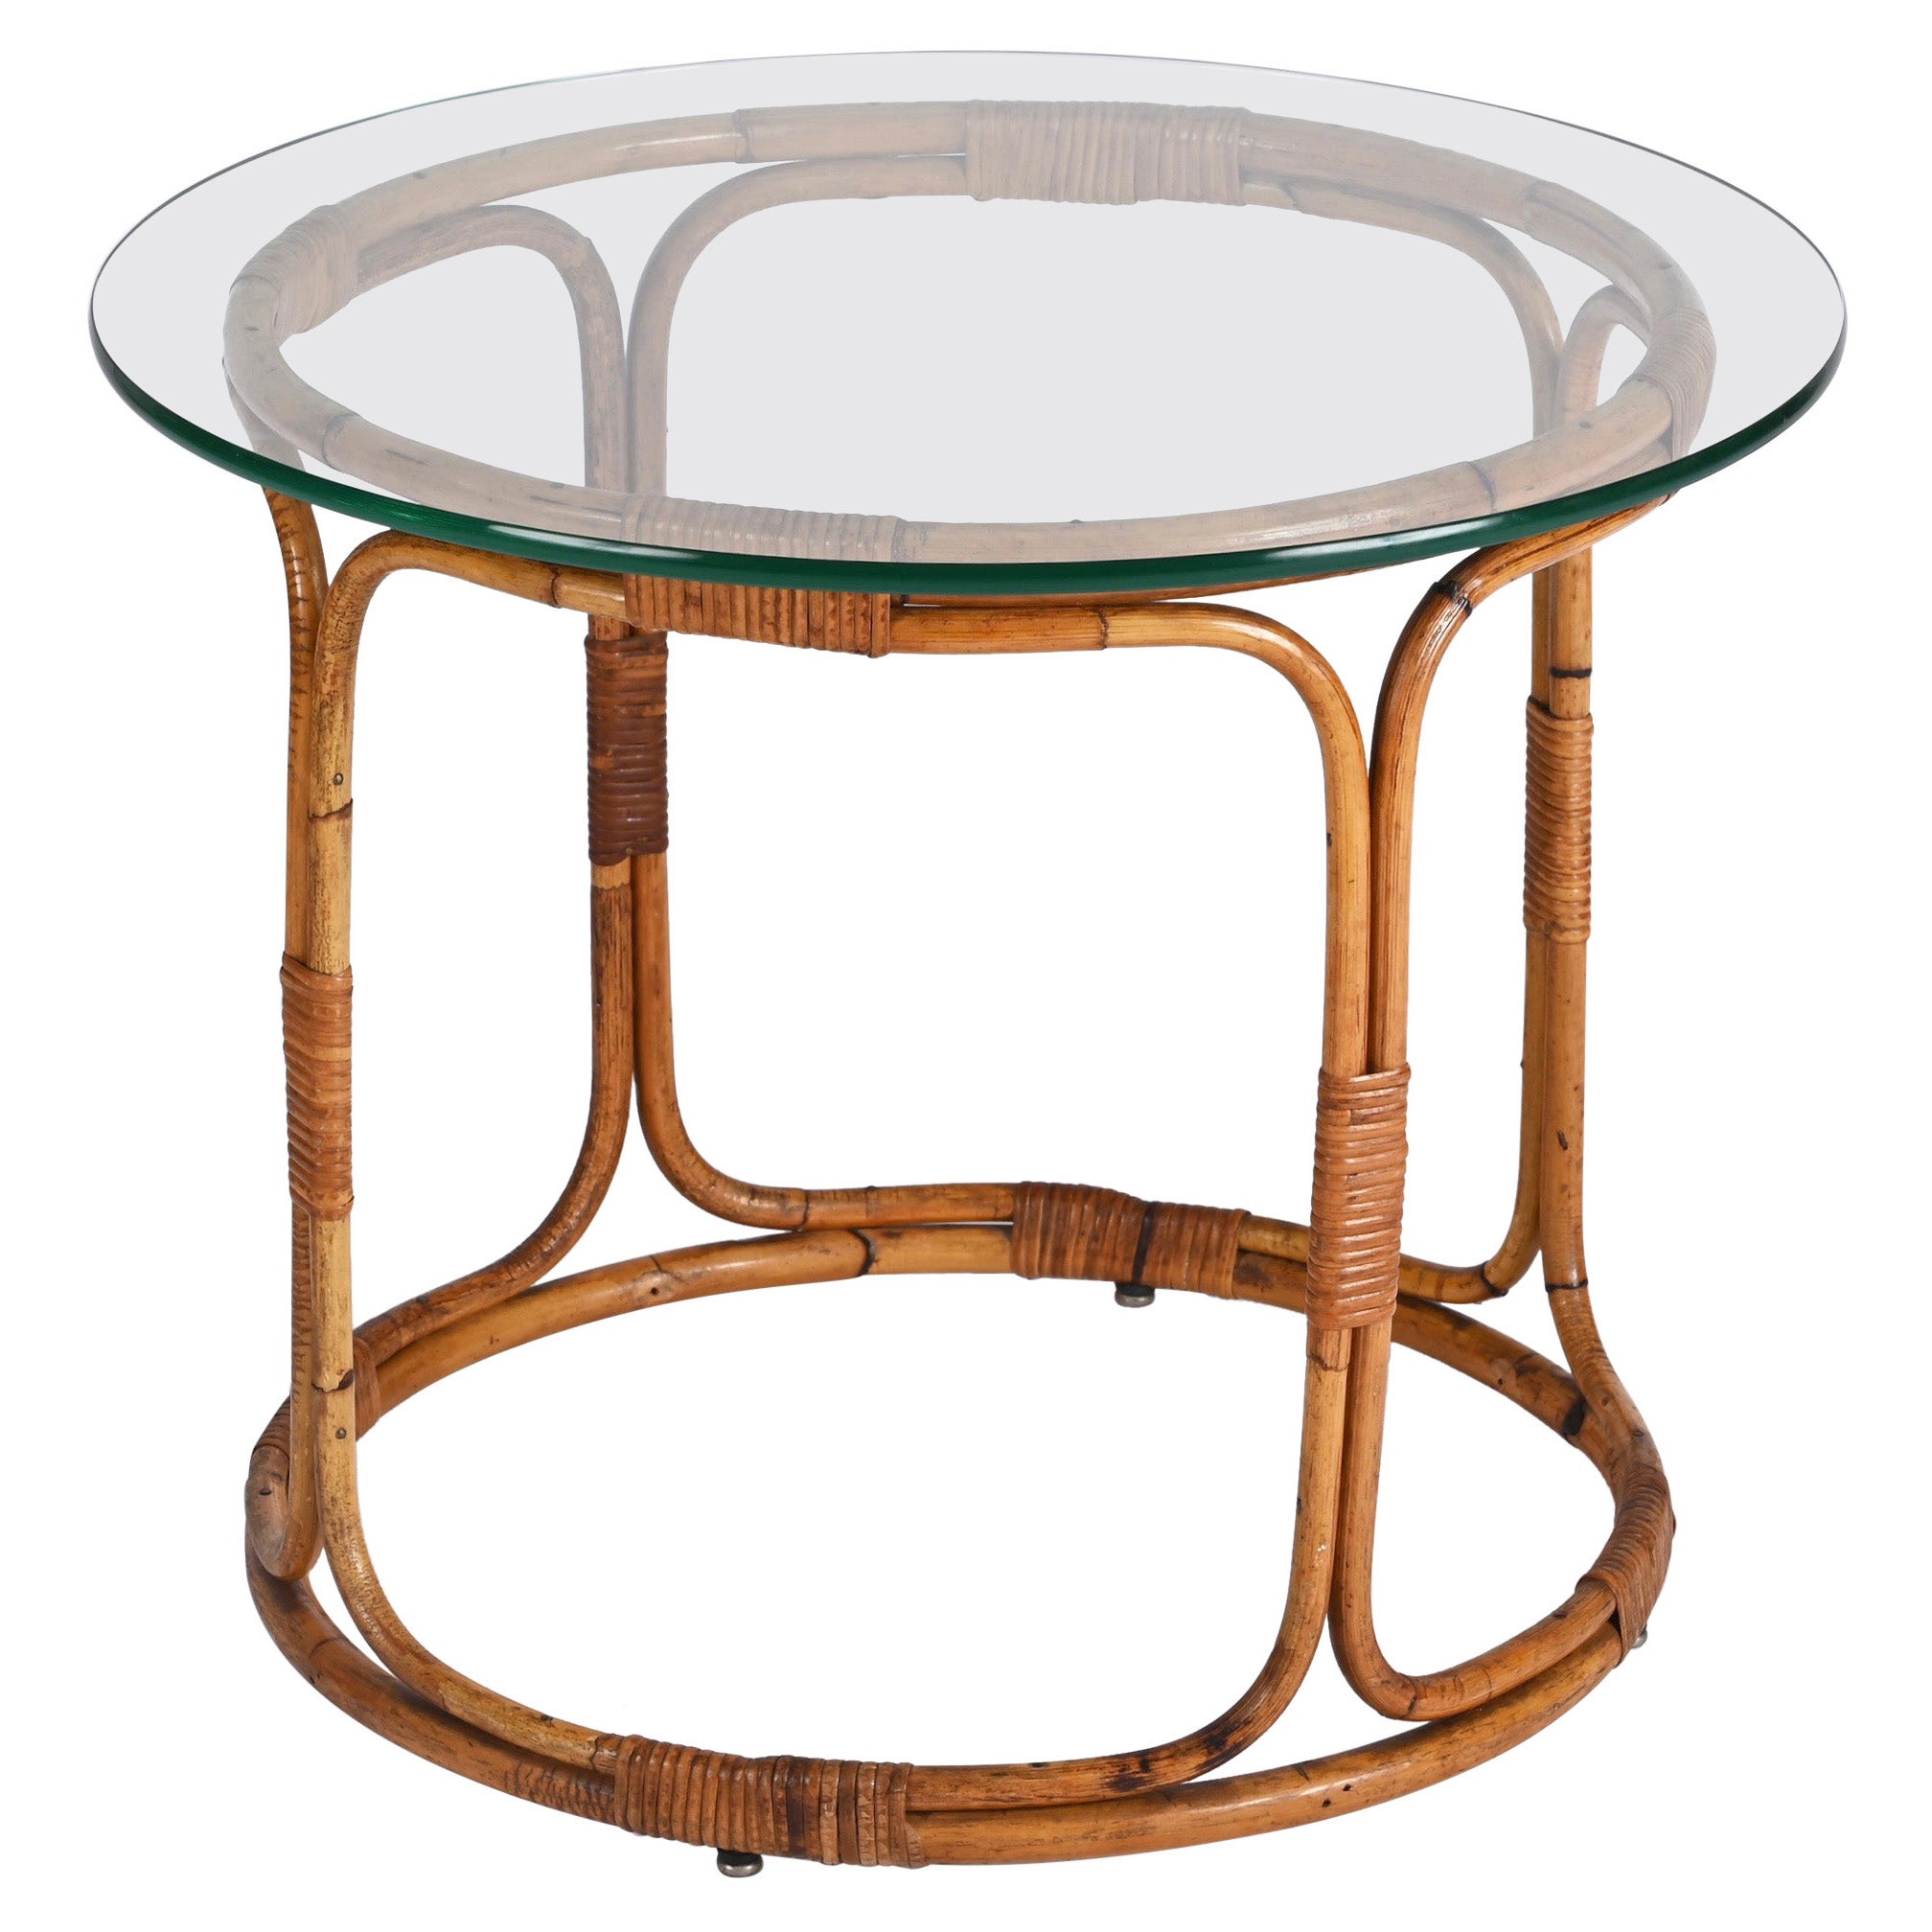 Midcentury Round Rattan, Bamboo Italian Coffee Table with Glass Shelf, 1960s For Sale